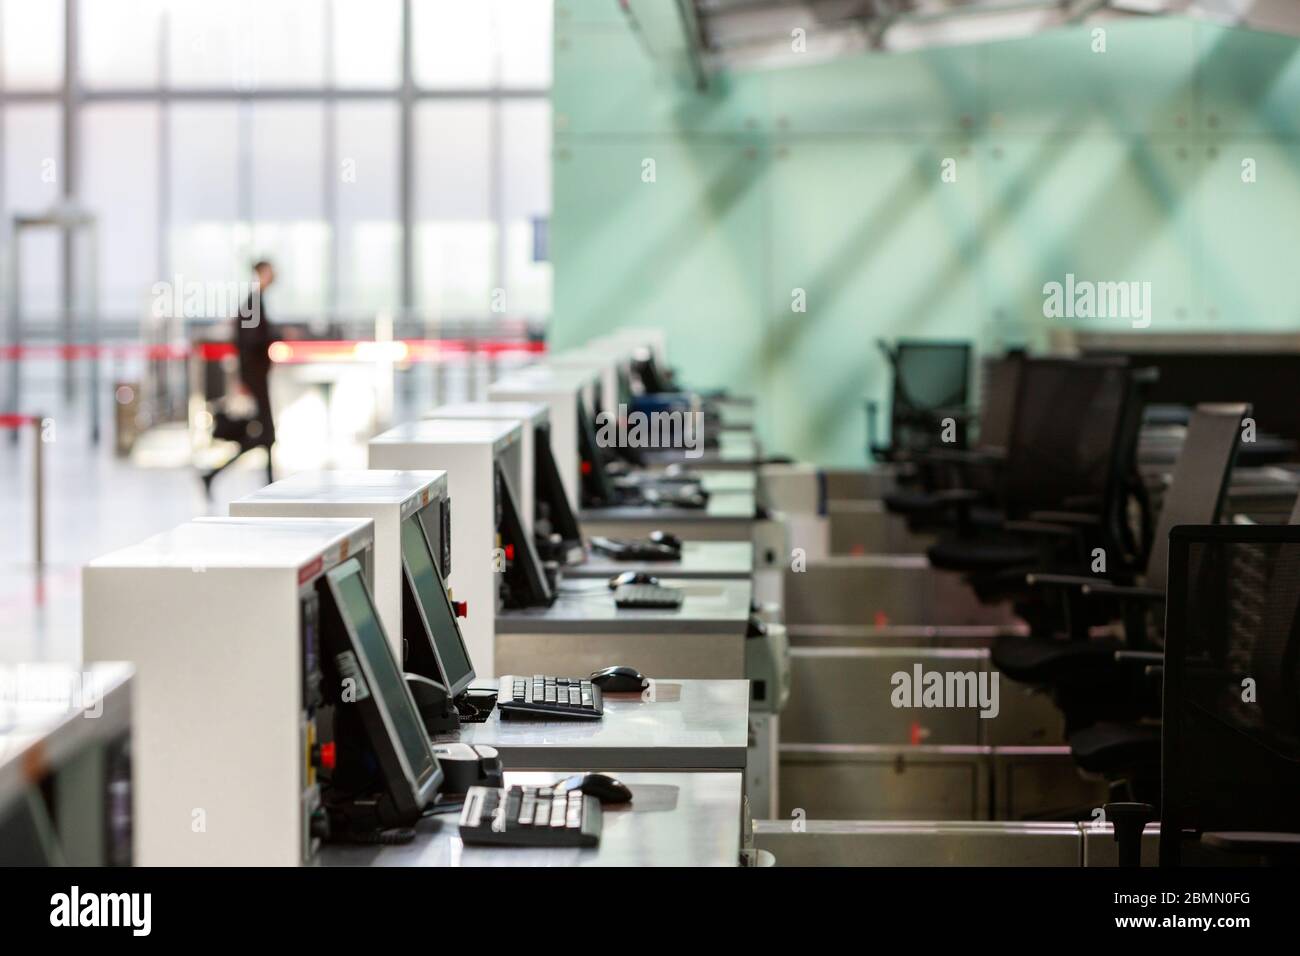 Row of check-in desks with computer monitors at empty airport terminal due to coronavirus pandemic/Covid-19 outbreak. Selective focus. Travel ban. Stock Photo